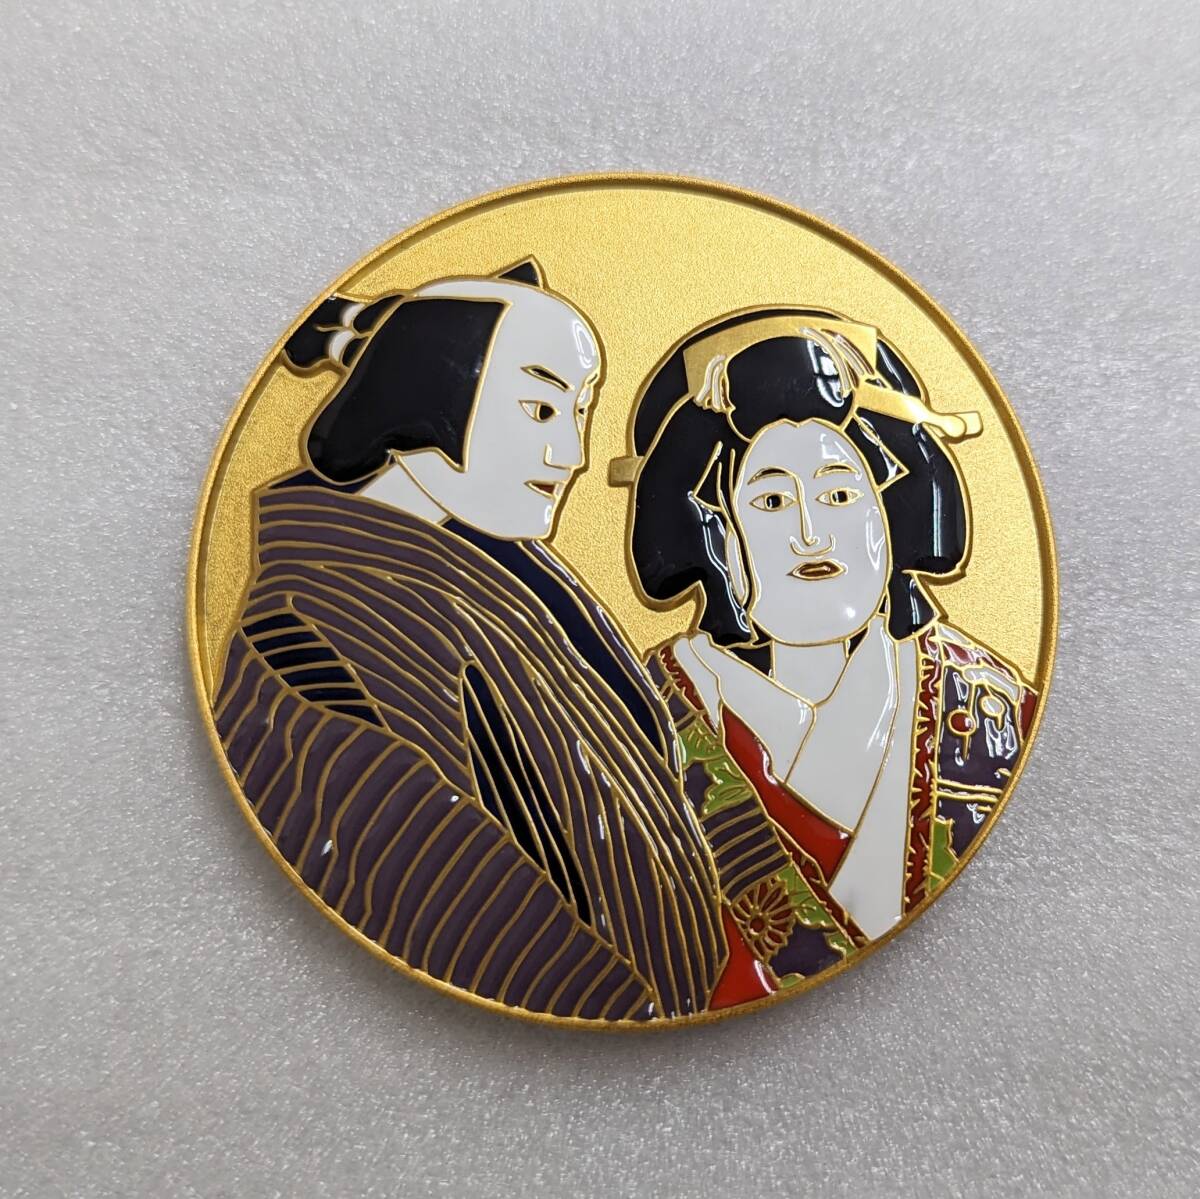  structure . department doll joruri bunraku the 7 treasures chapter . original silver the 7 treasures gilding finishing medal approximately 160g diameter 60mm special case Lee fret attaching 